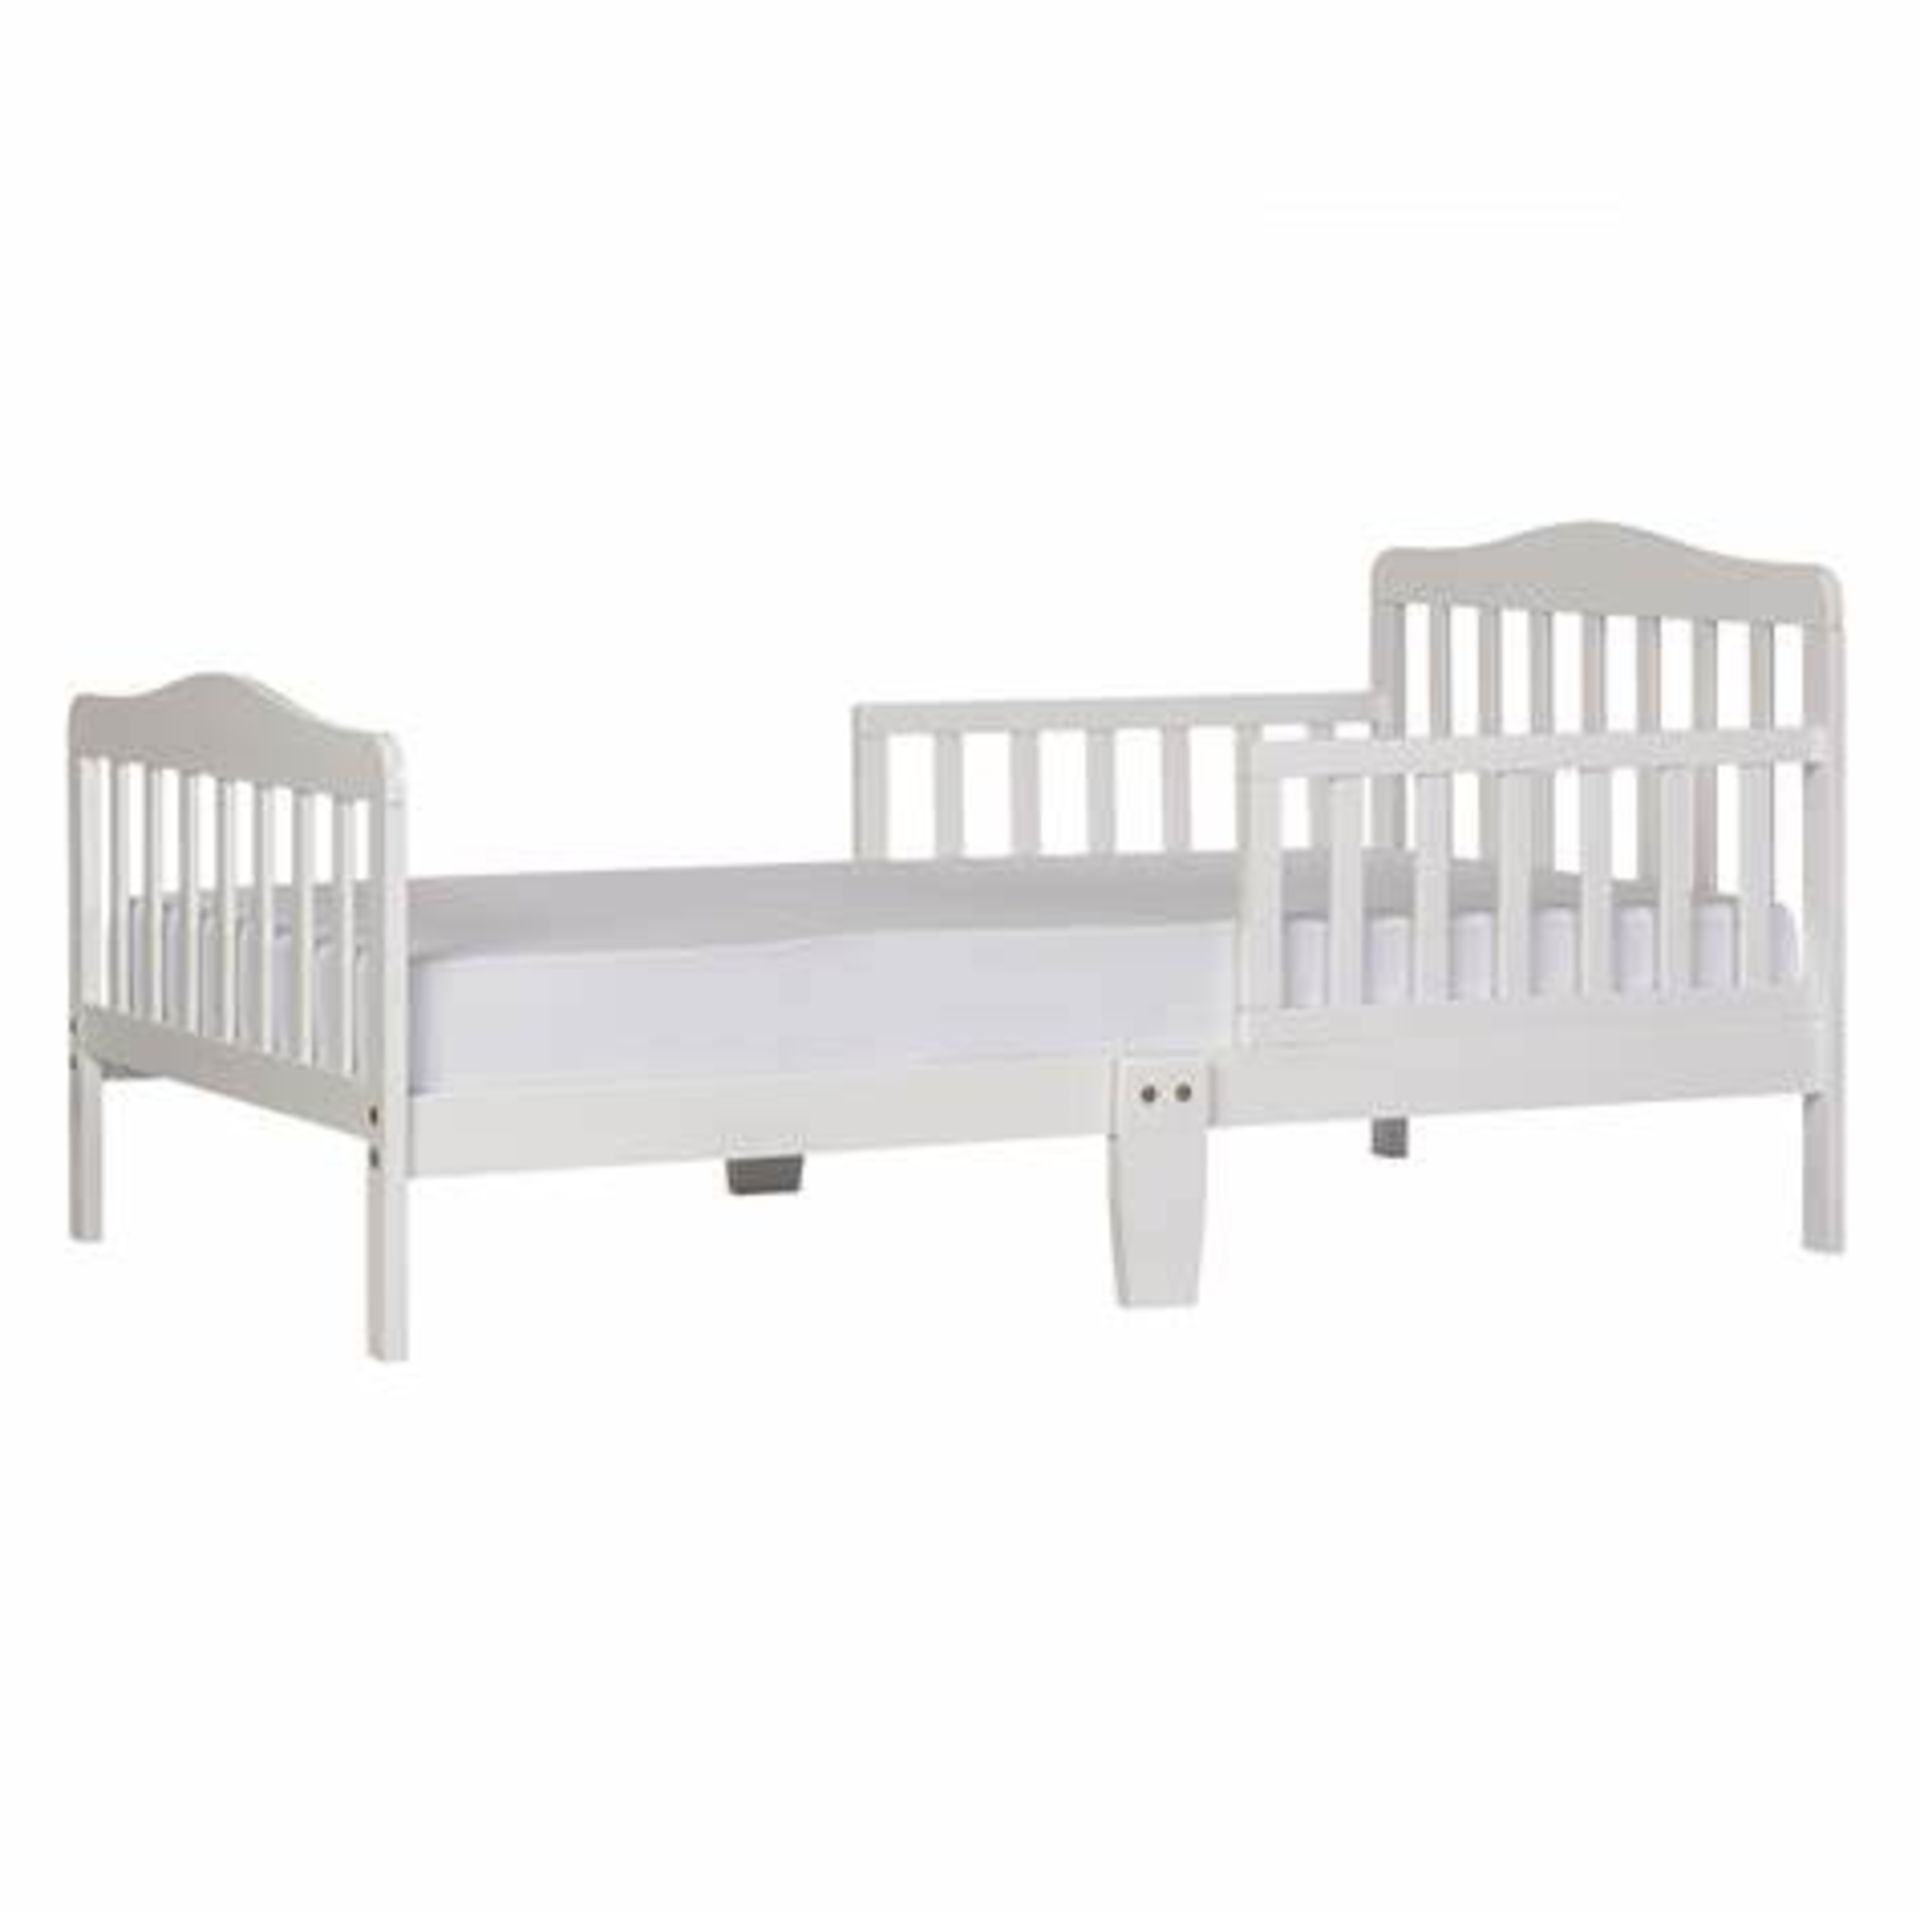 10 X Brand New Dream on Me Classic Toddler BedS. Product dimensionS - 144.8L x 71.1W x 76.2H CM - Bild 3 aus 5